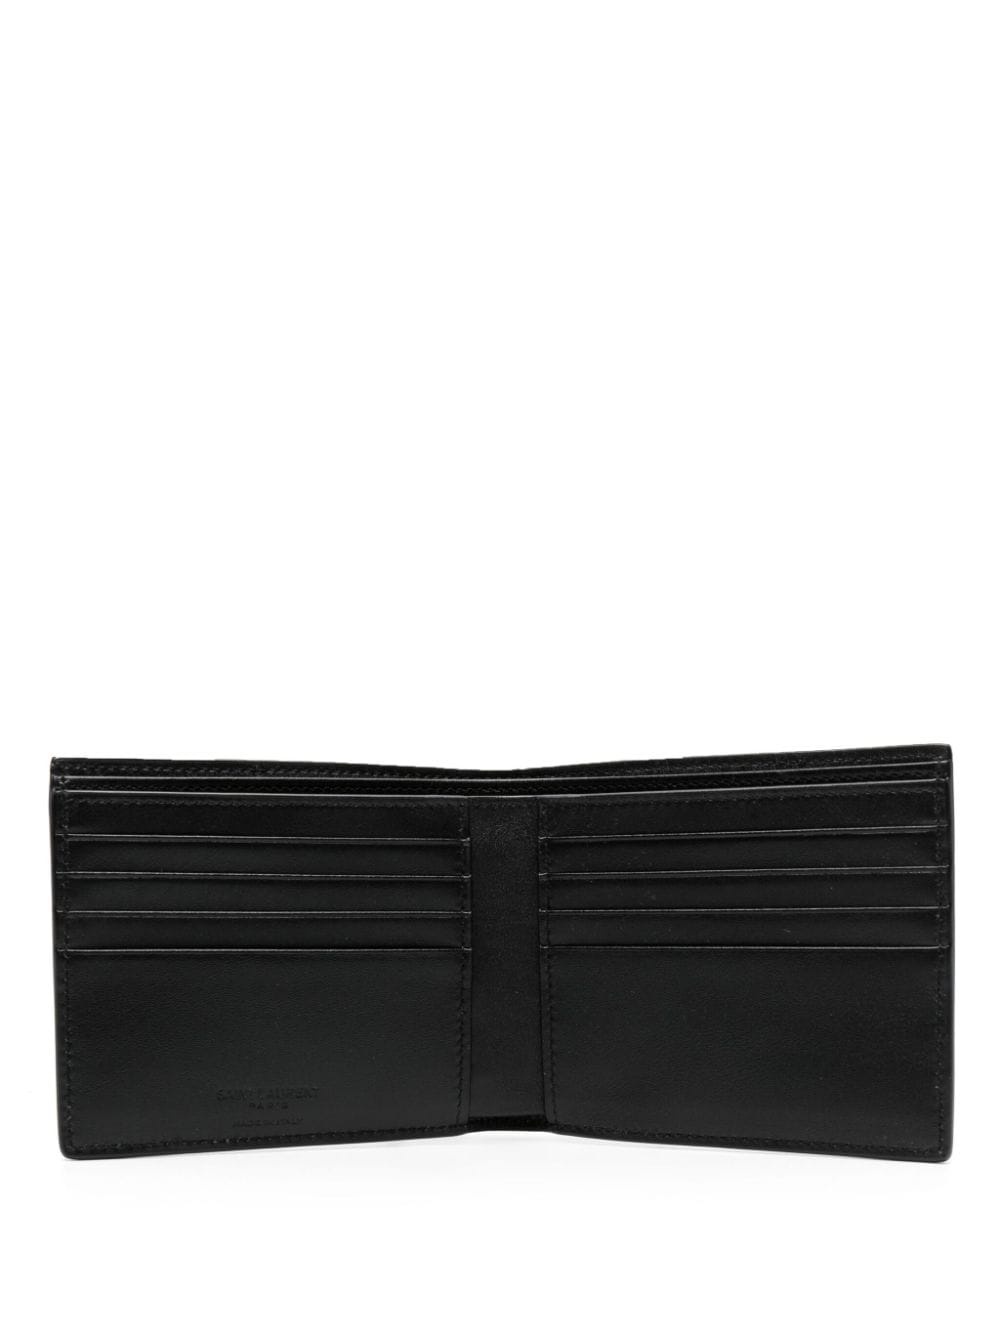 East/West grained leather wallet - 3